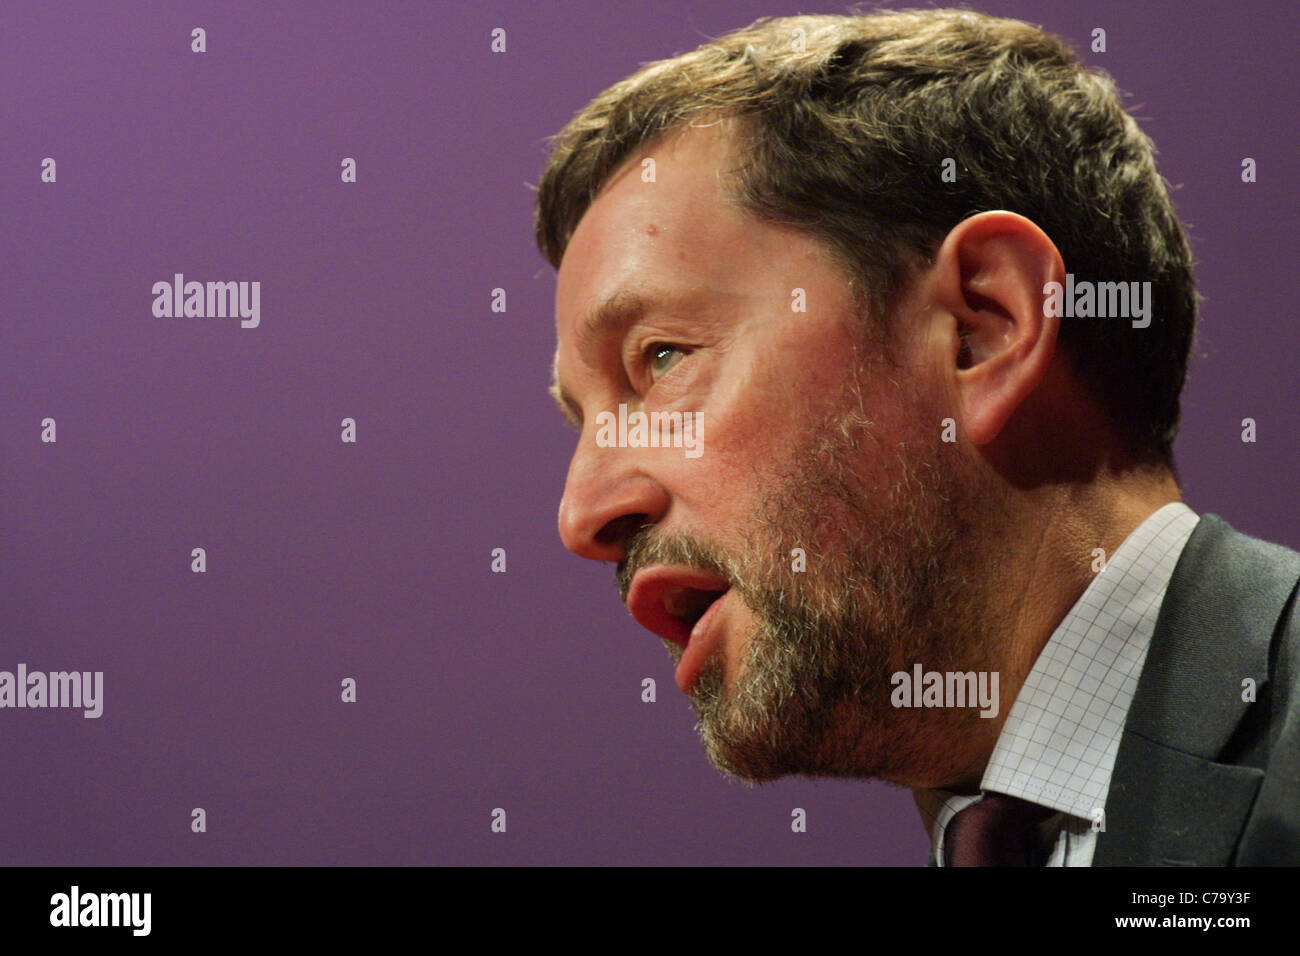 David Blunkett speaks at the Labour Party conference, held in Glasgow, Scotland, on 15th February 2003. Stock Photo